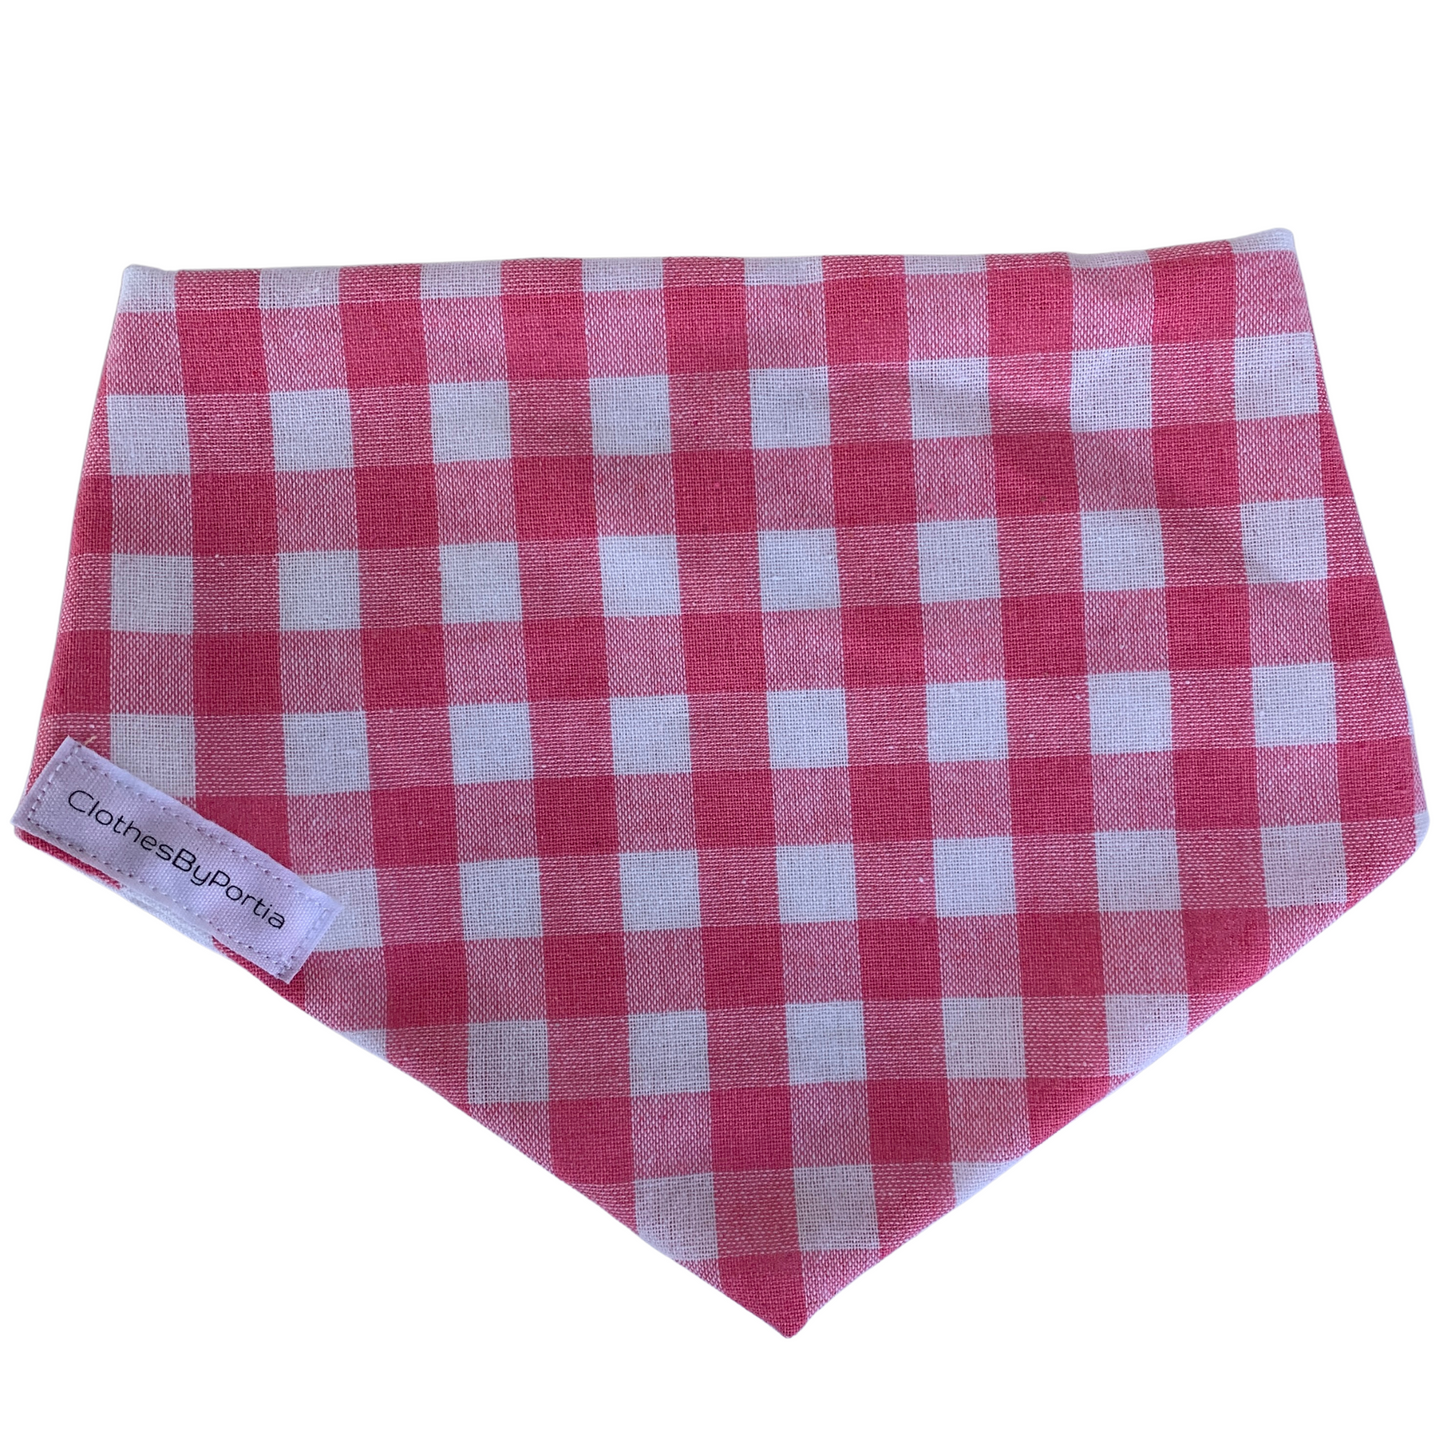 candy pink and white gingham dog bandana made in New Zealand